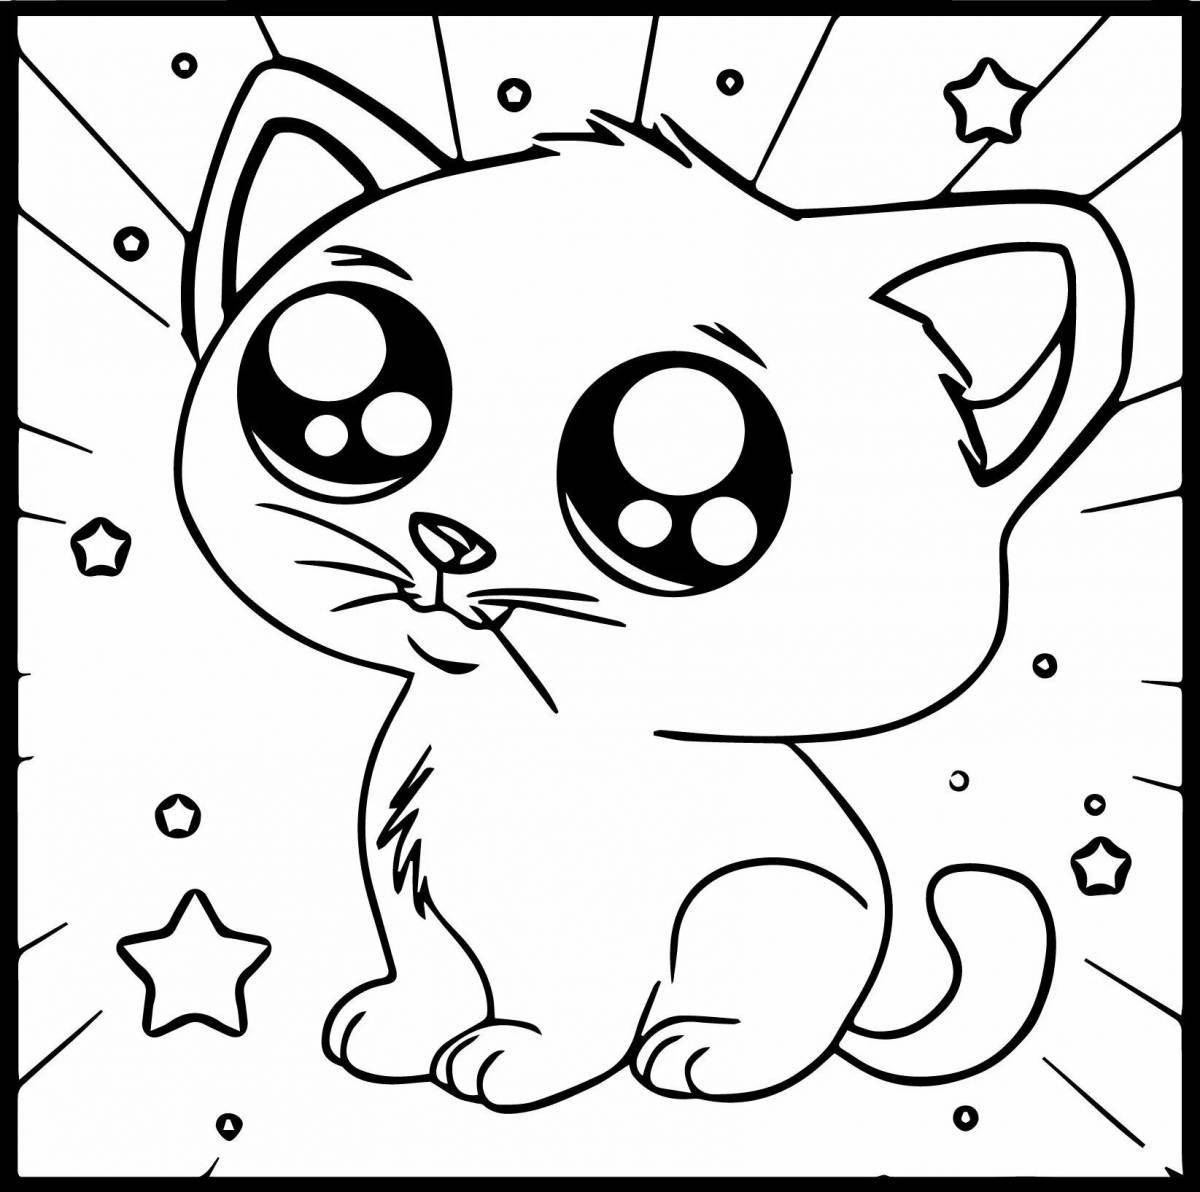 Colorful cute kitten coloring page